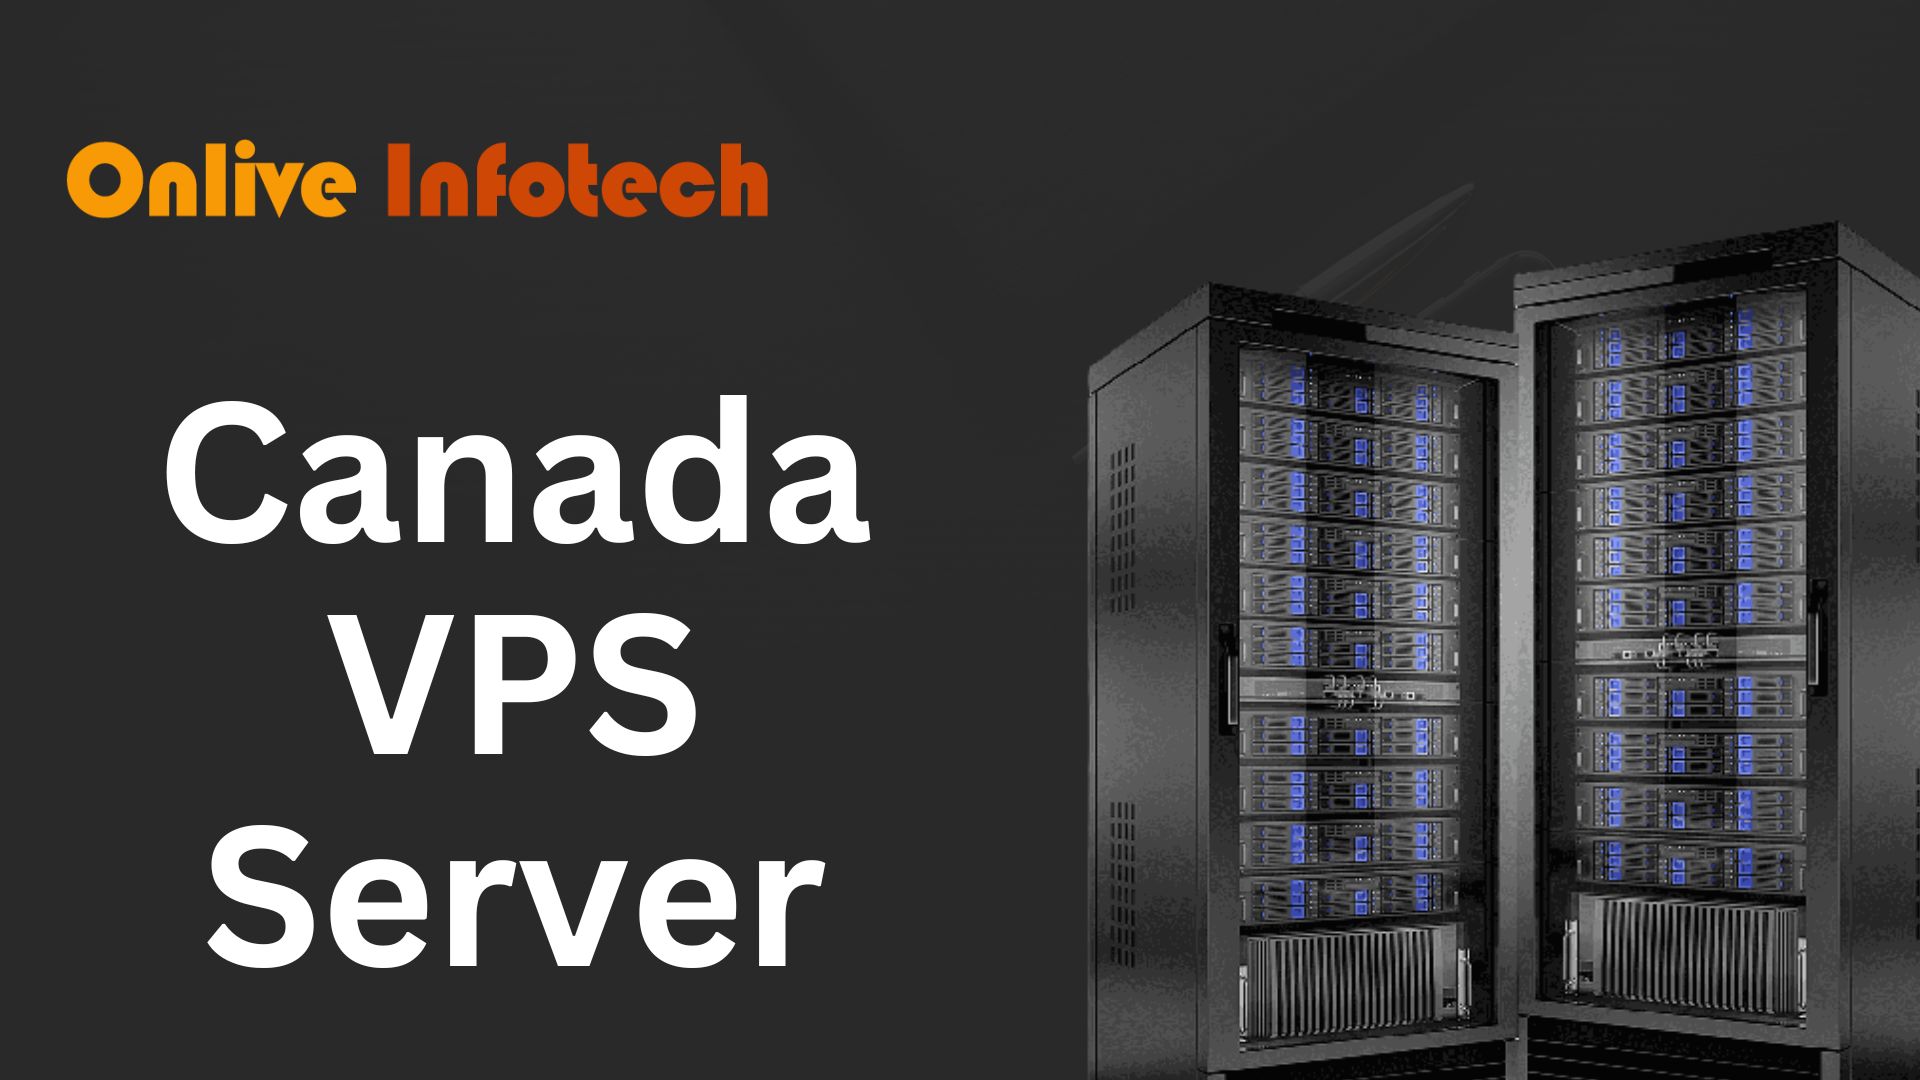 LightUp Your Business with Canada VPS Server Via Onliveinfotech